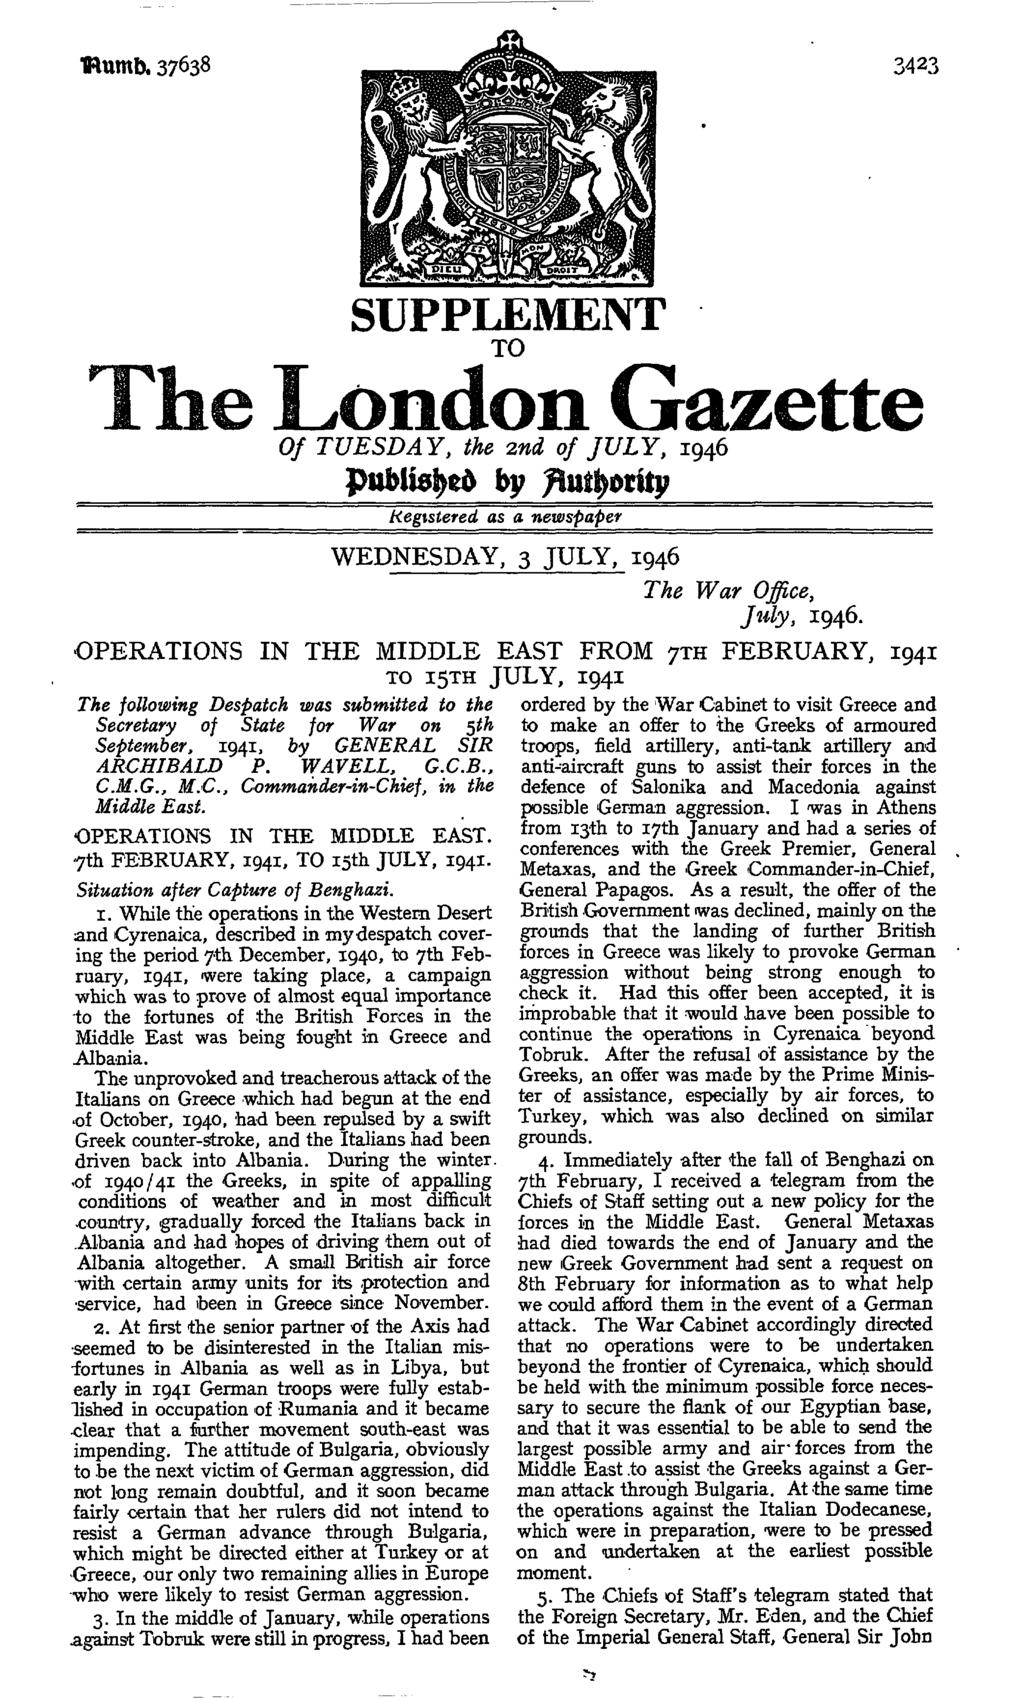 IRumb, 37638 3423 SUPPLEMENT TO London Gazette Of TUESDAY, the 2nd of JULY, 1946 by Registered as a newspaper WEDNESDAY, 3 JULY, 1946 The War Office, July, 1946.